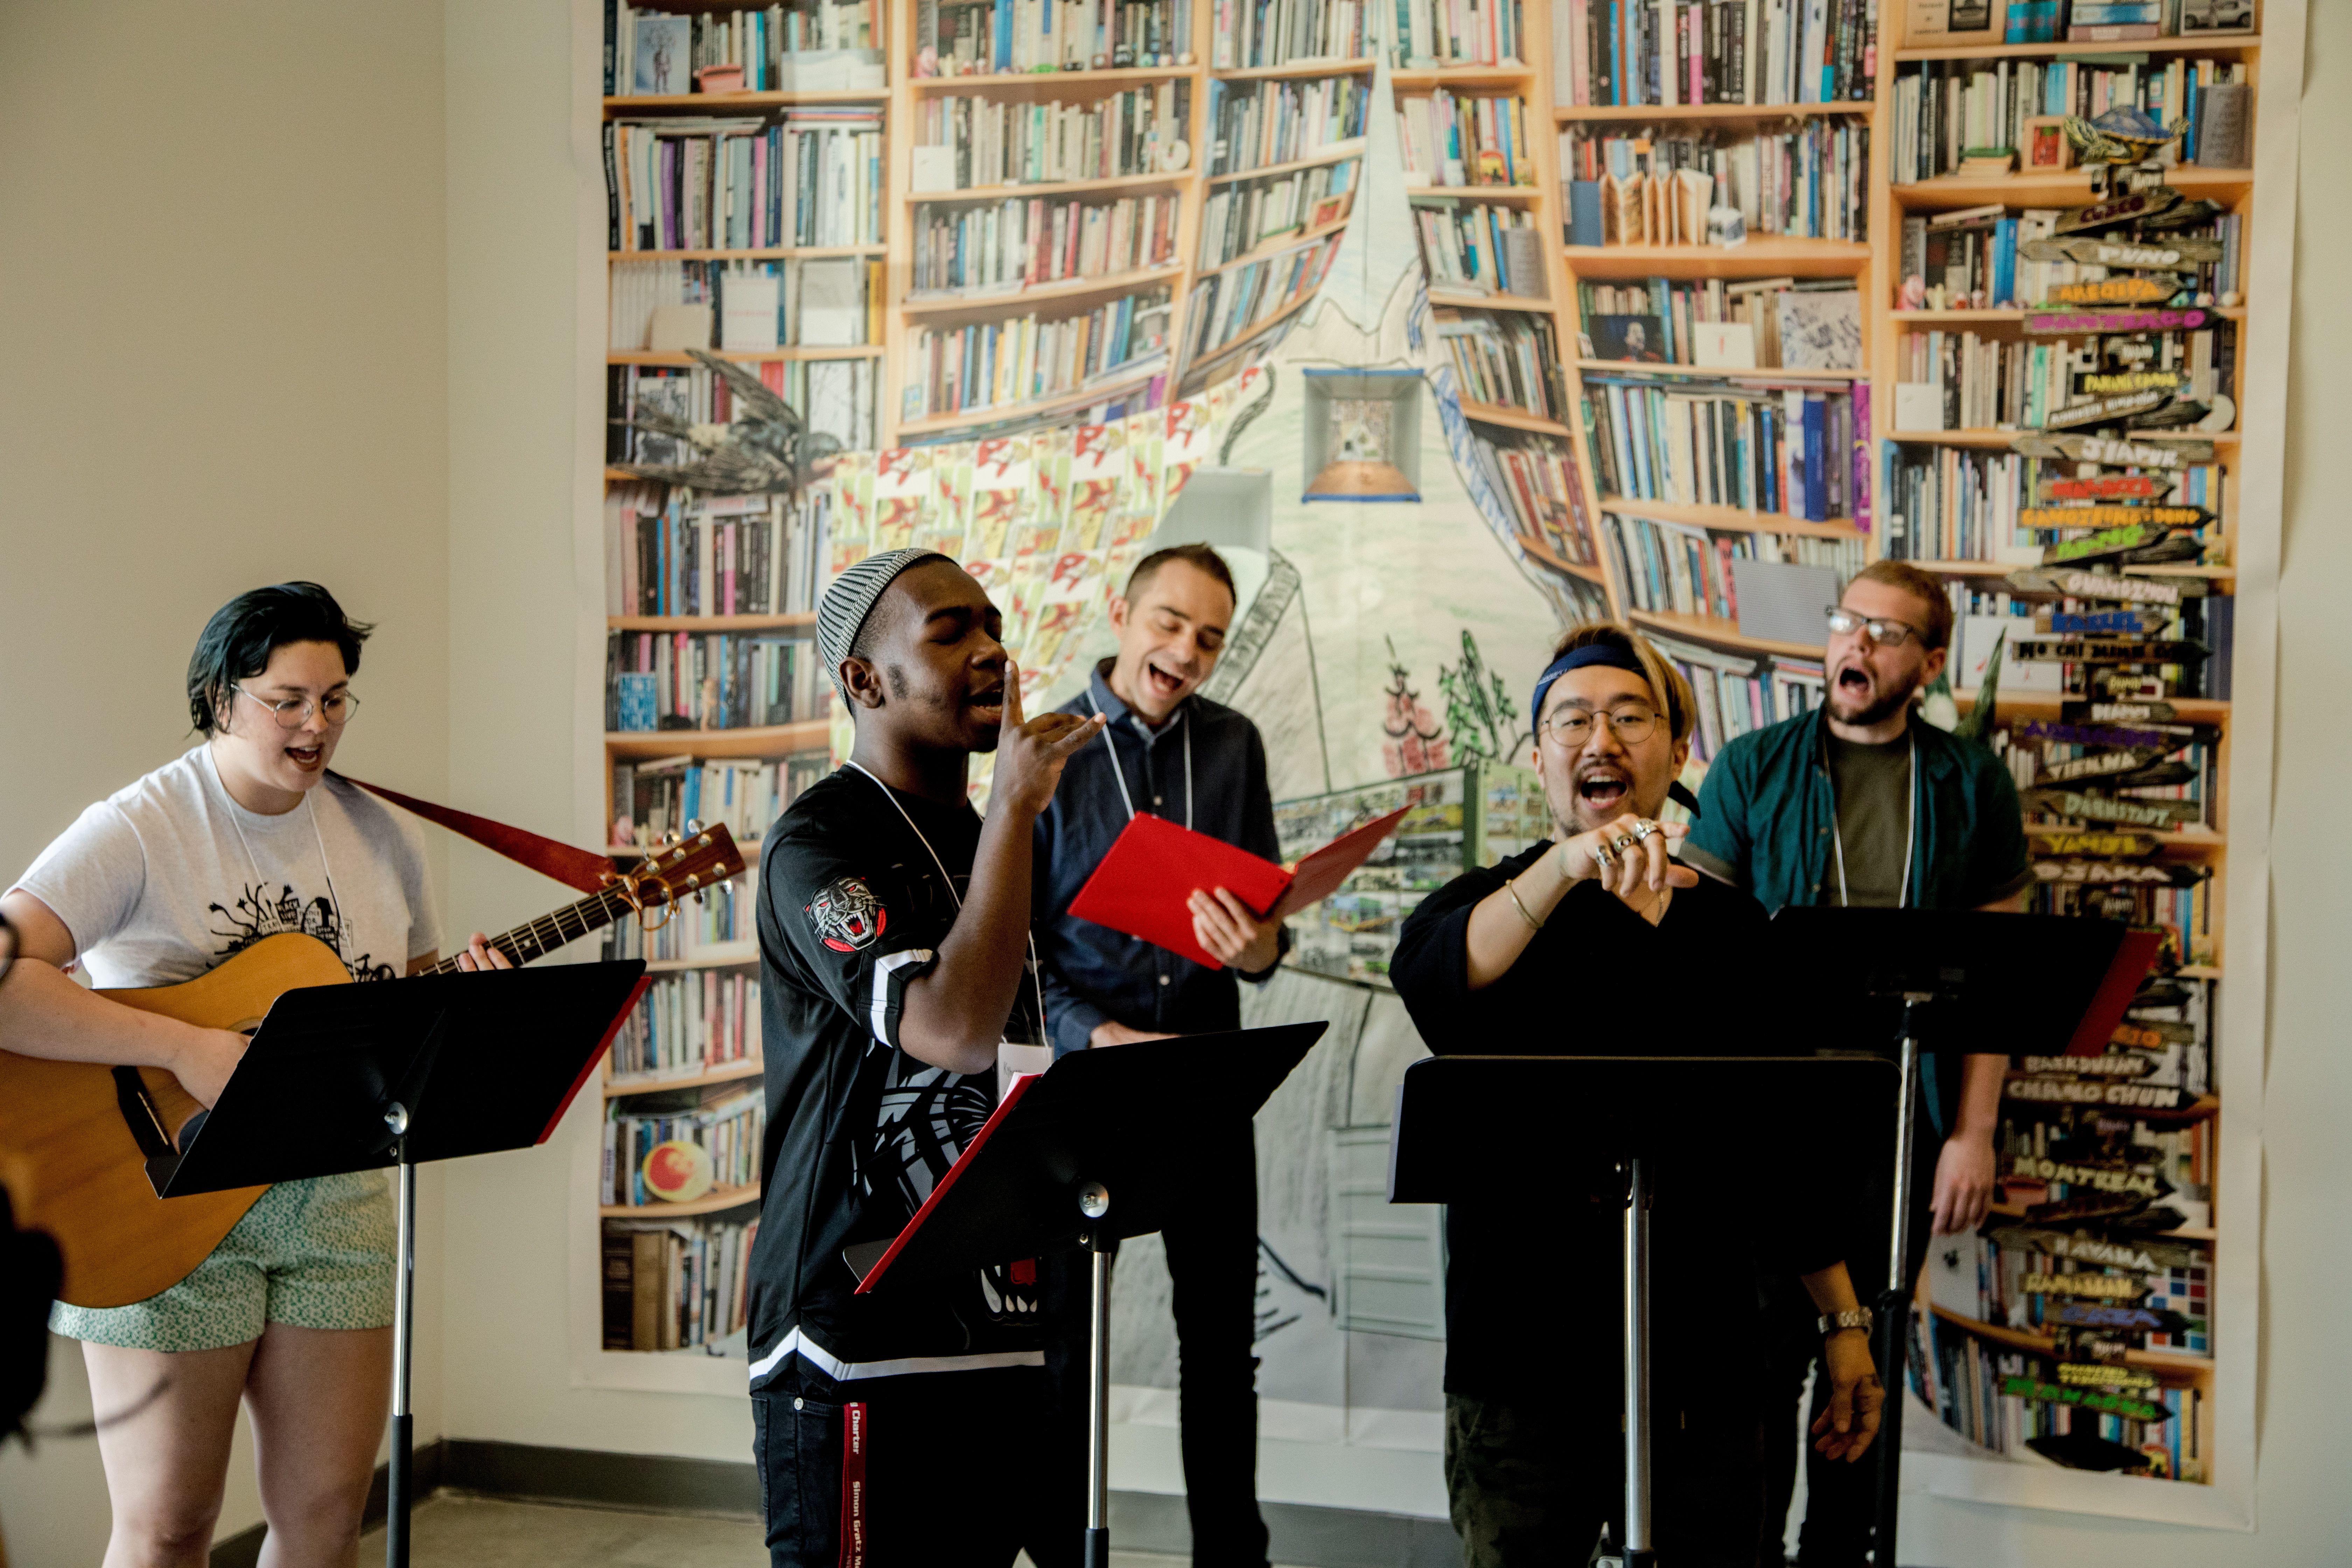 A band of five singing and performing in front of a painting of bookshelves.